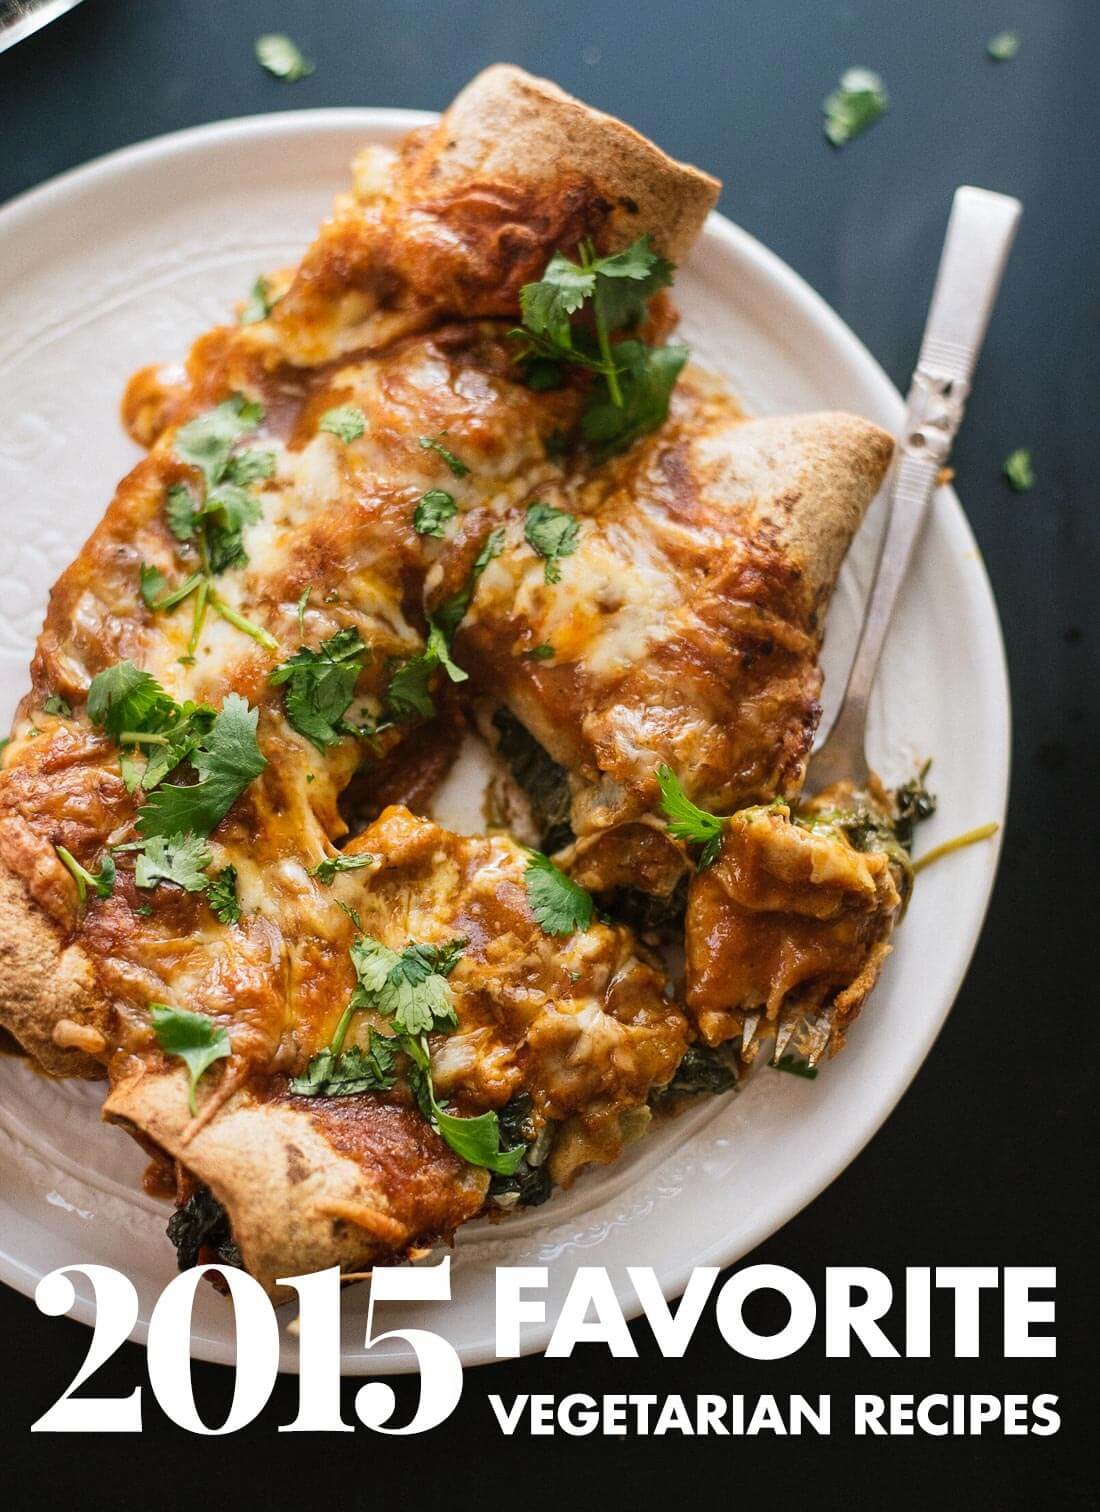 My top 10 favorite vegetarian recipes from 2015! cookieandkate.com